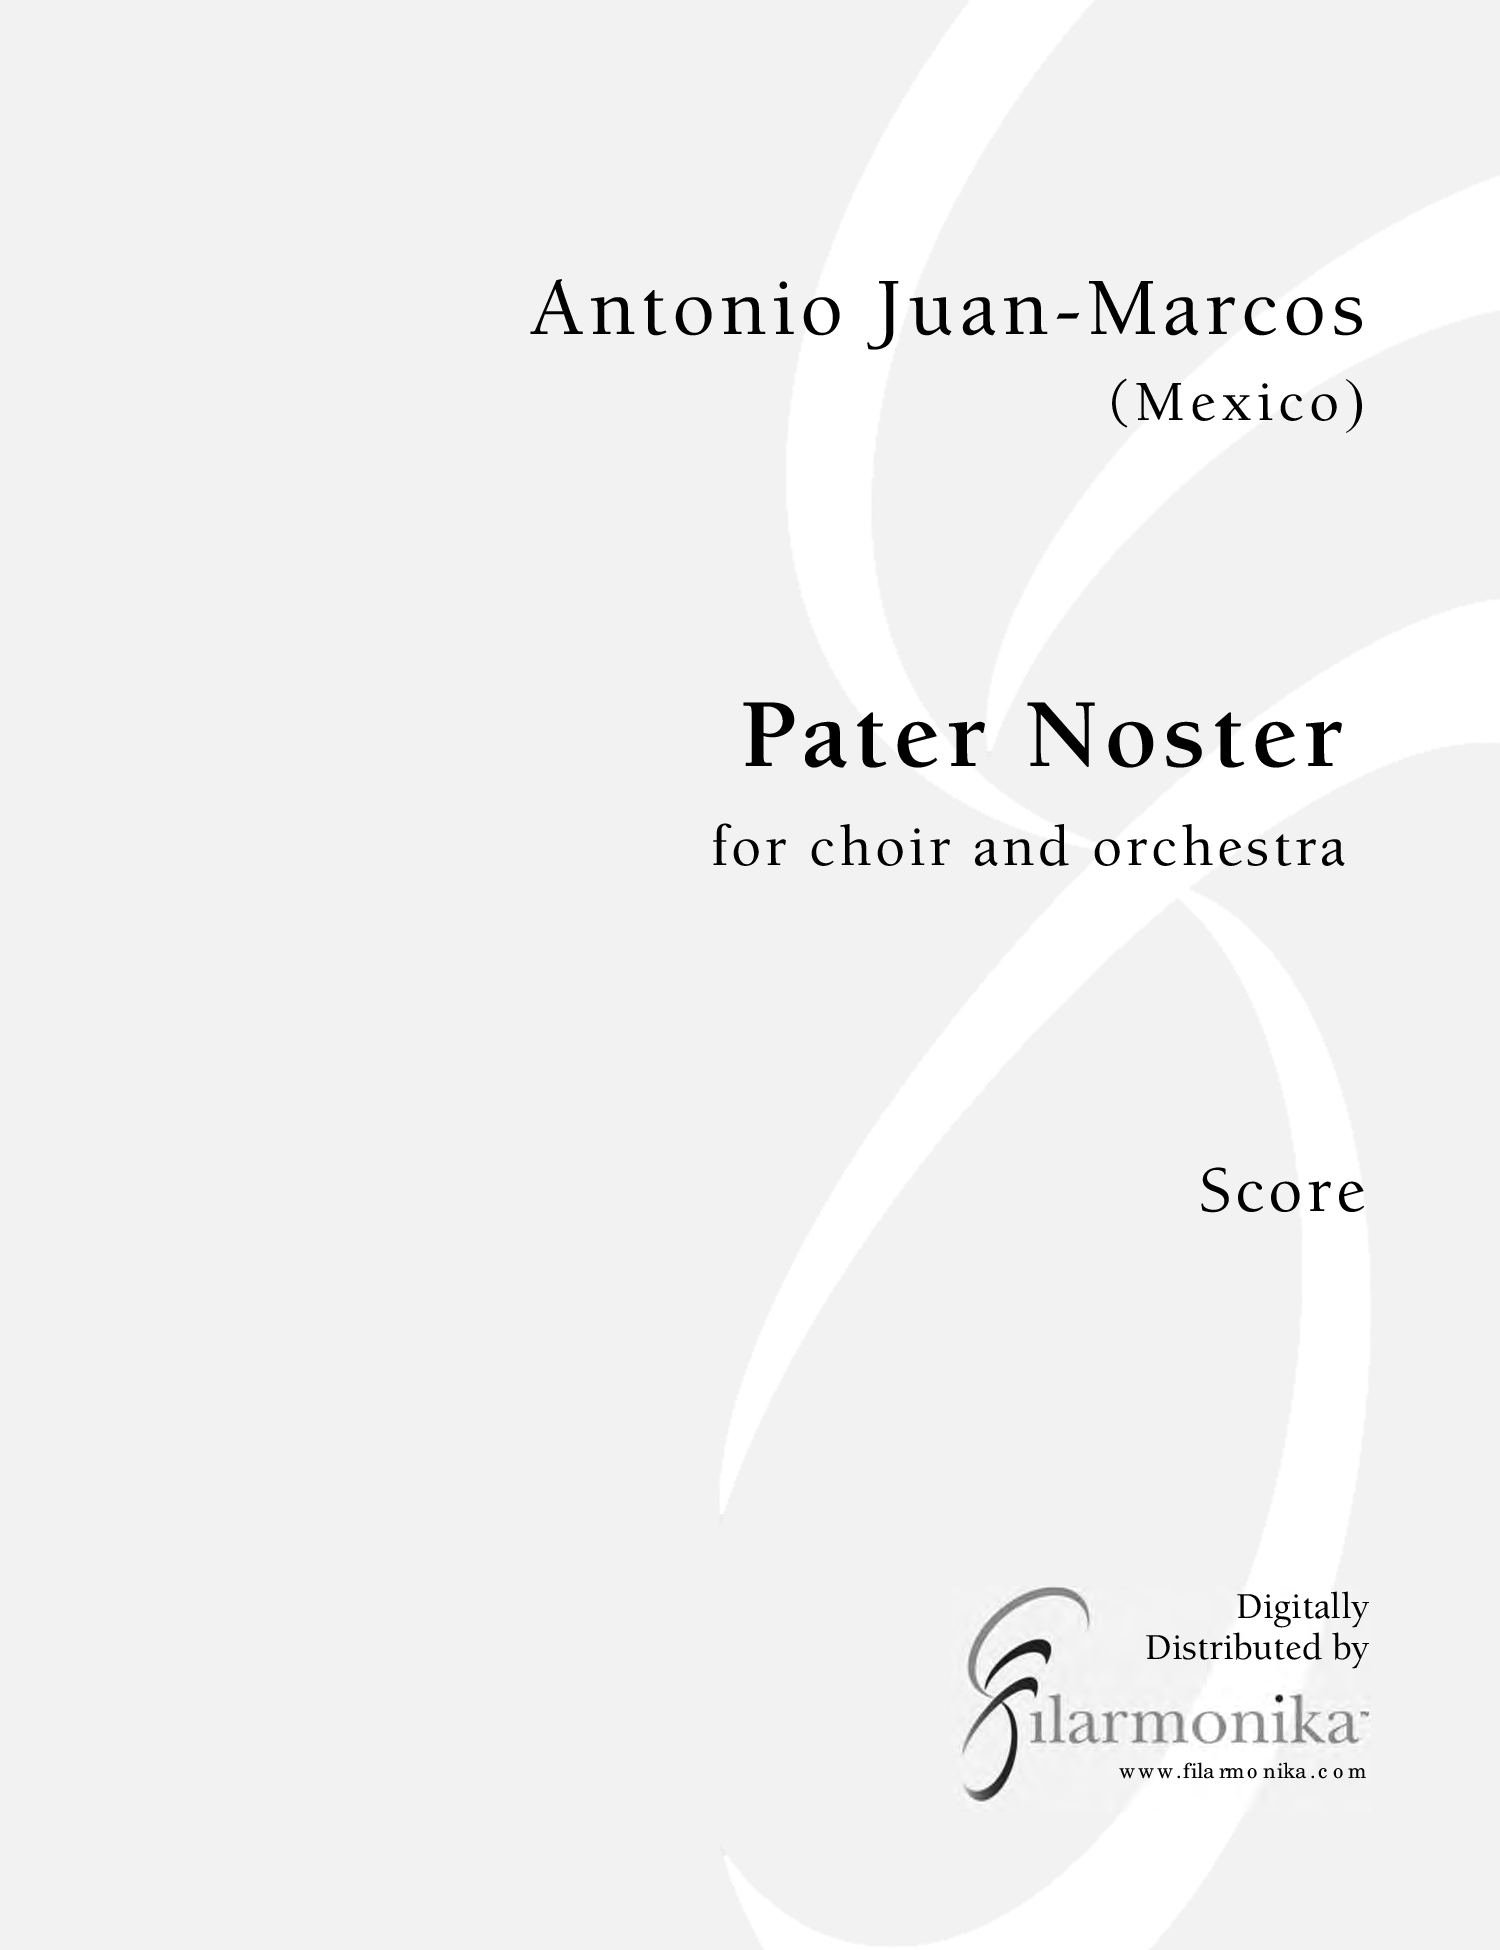 Pater Noster, for soprano, choir, and orchestra